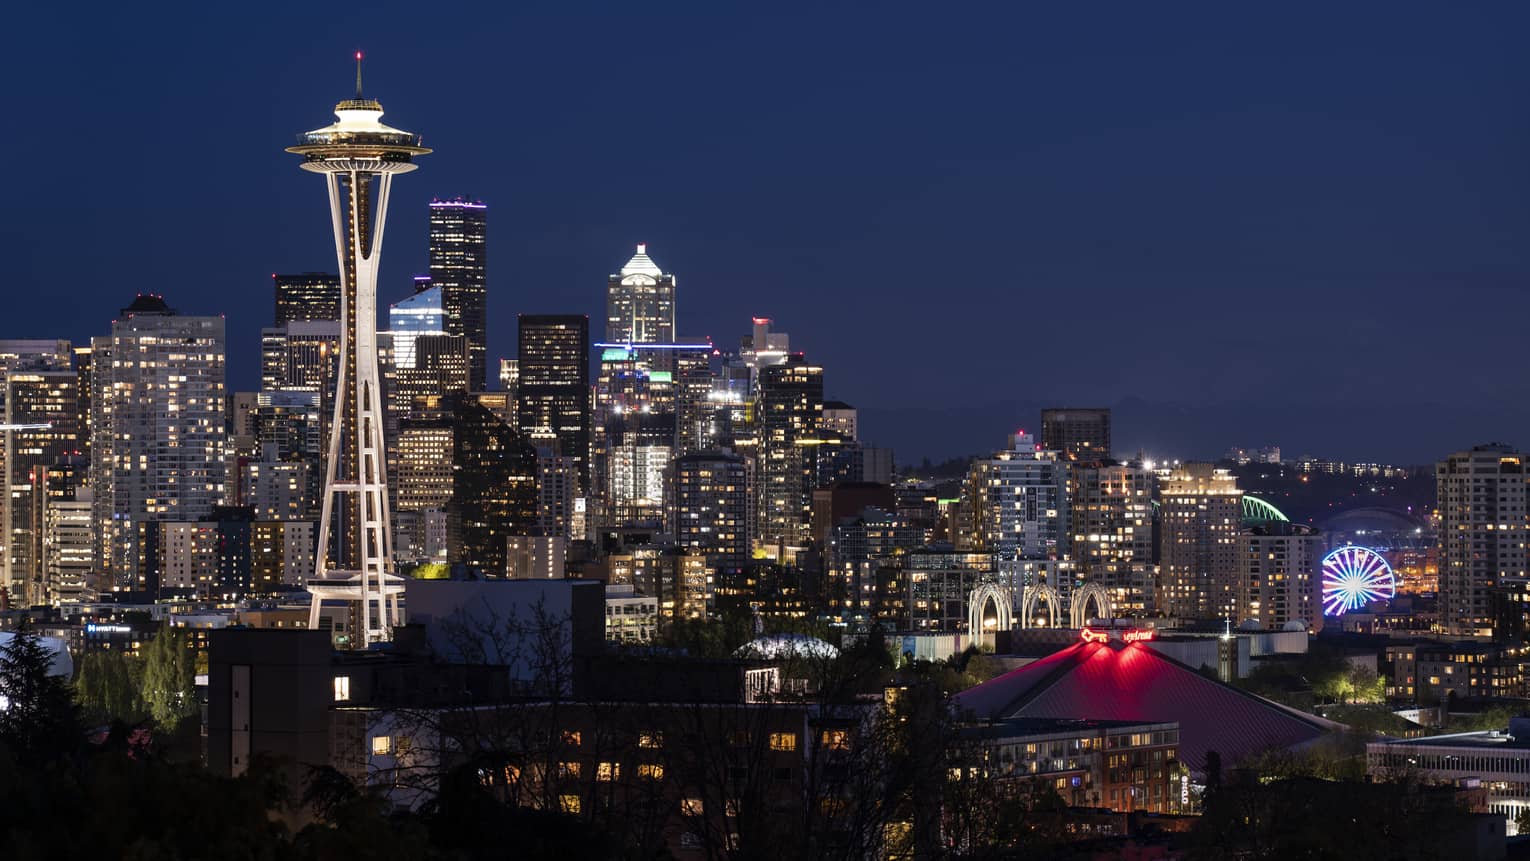 The city of Seattle and the Space Needle are illuminated at night